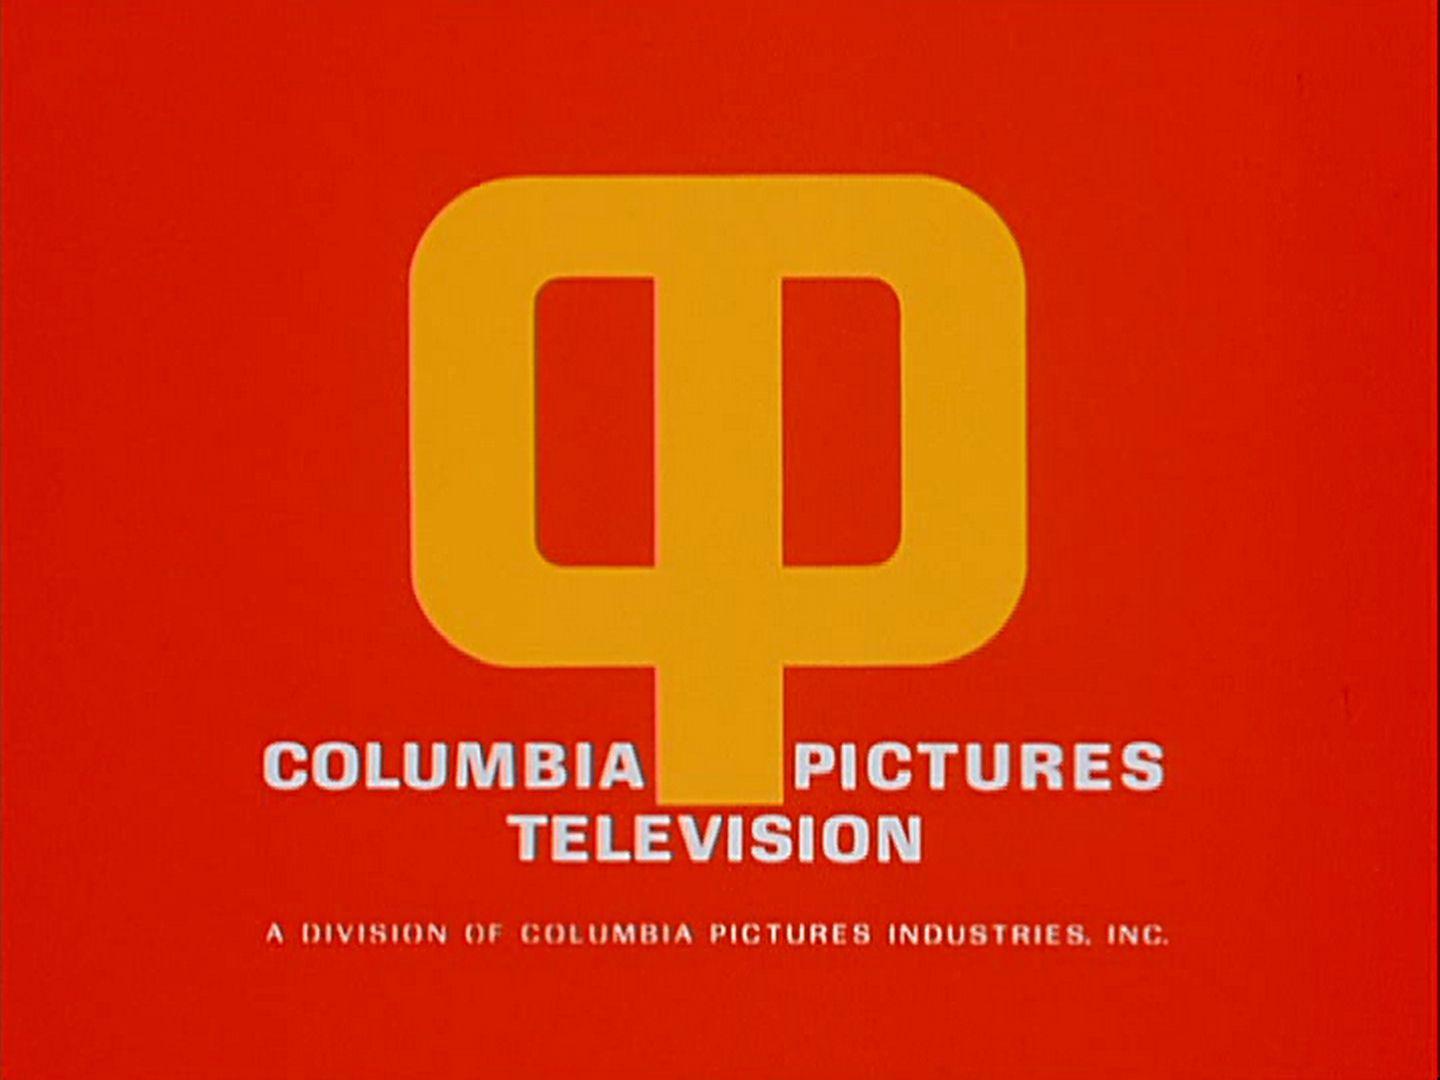 Television Logo - Columbia Pictures Television/Other | Logopedia | FANDOM powered by Wikia